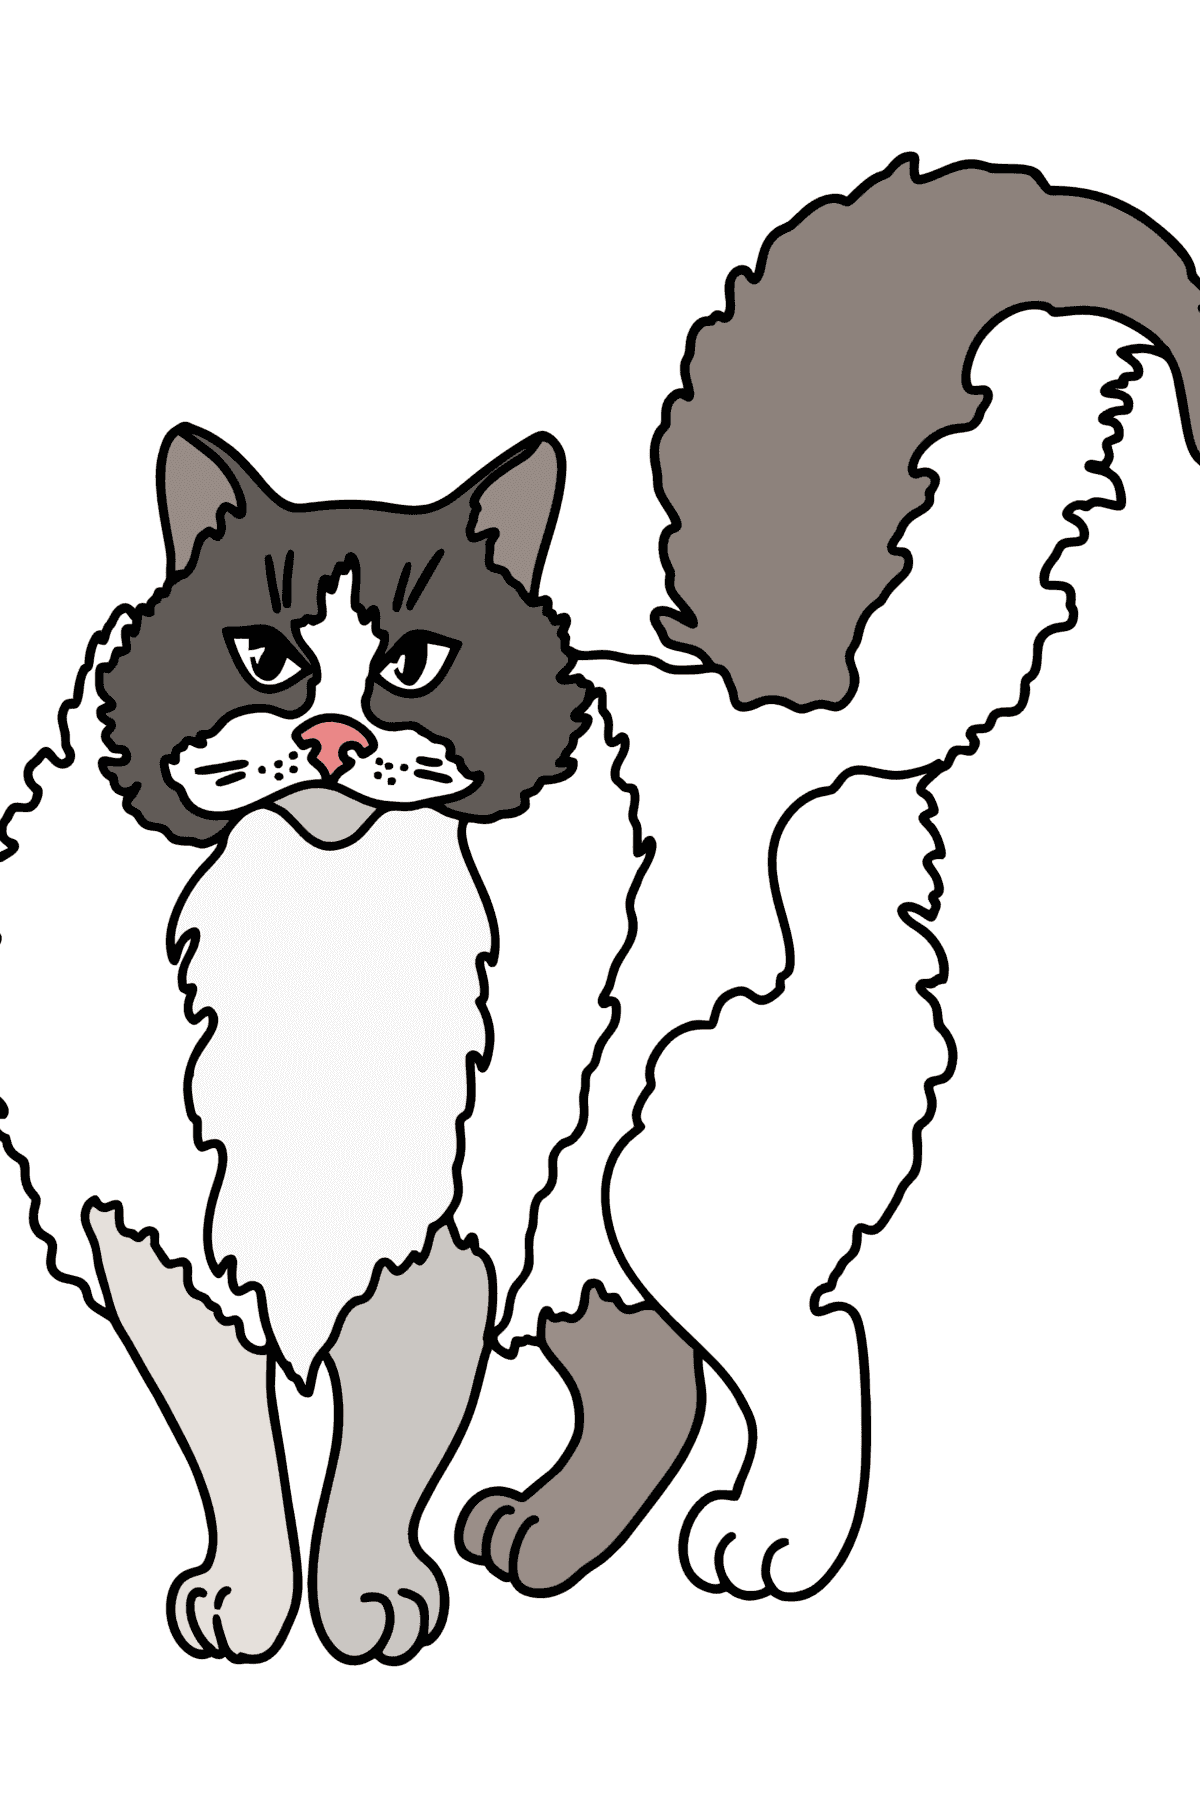 Ragdoll Cat coloring page - Coloring Pages for Kids